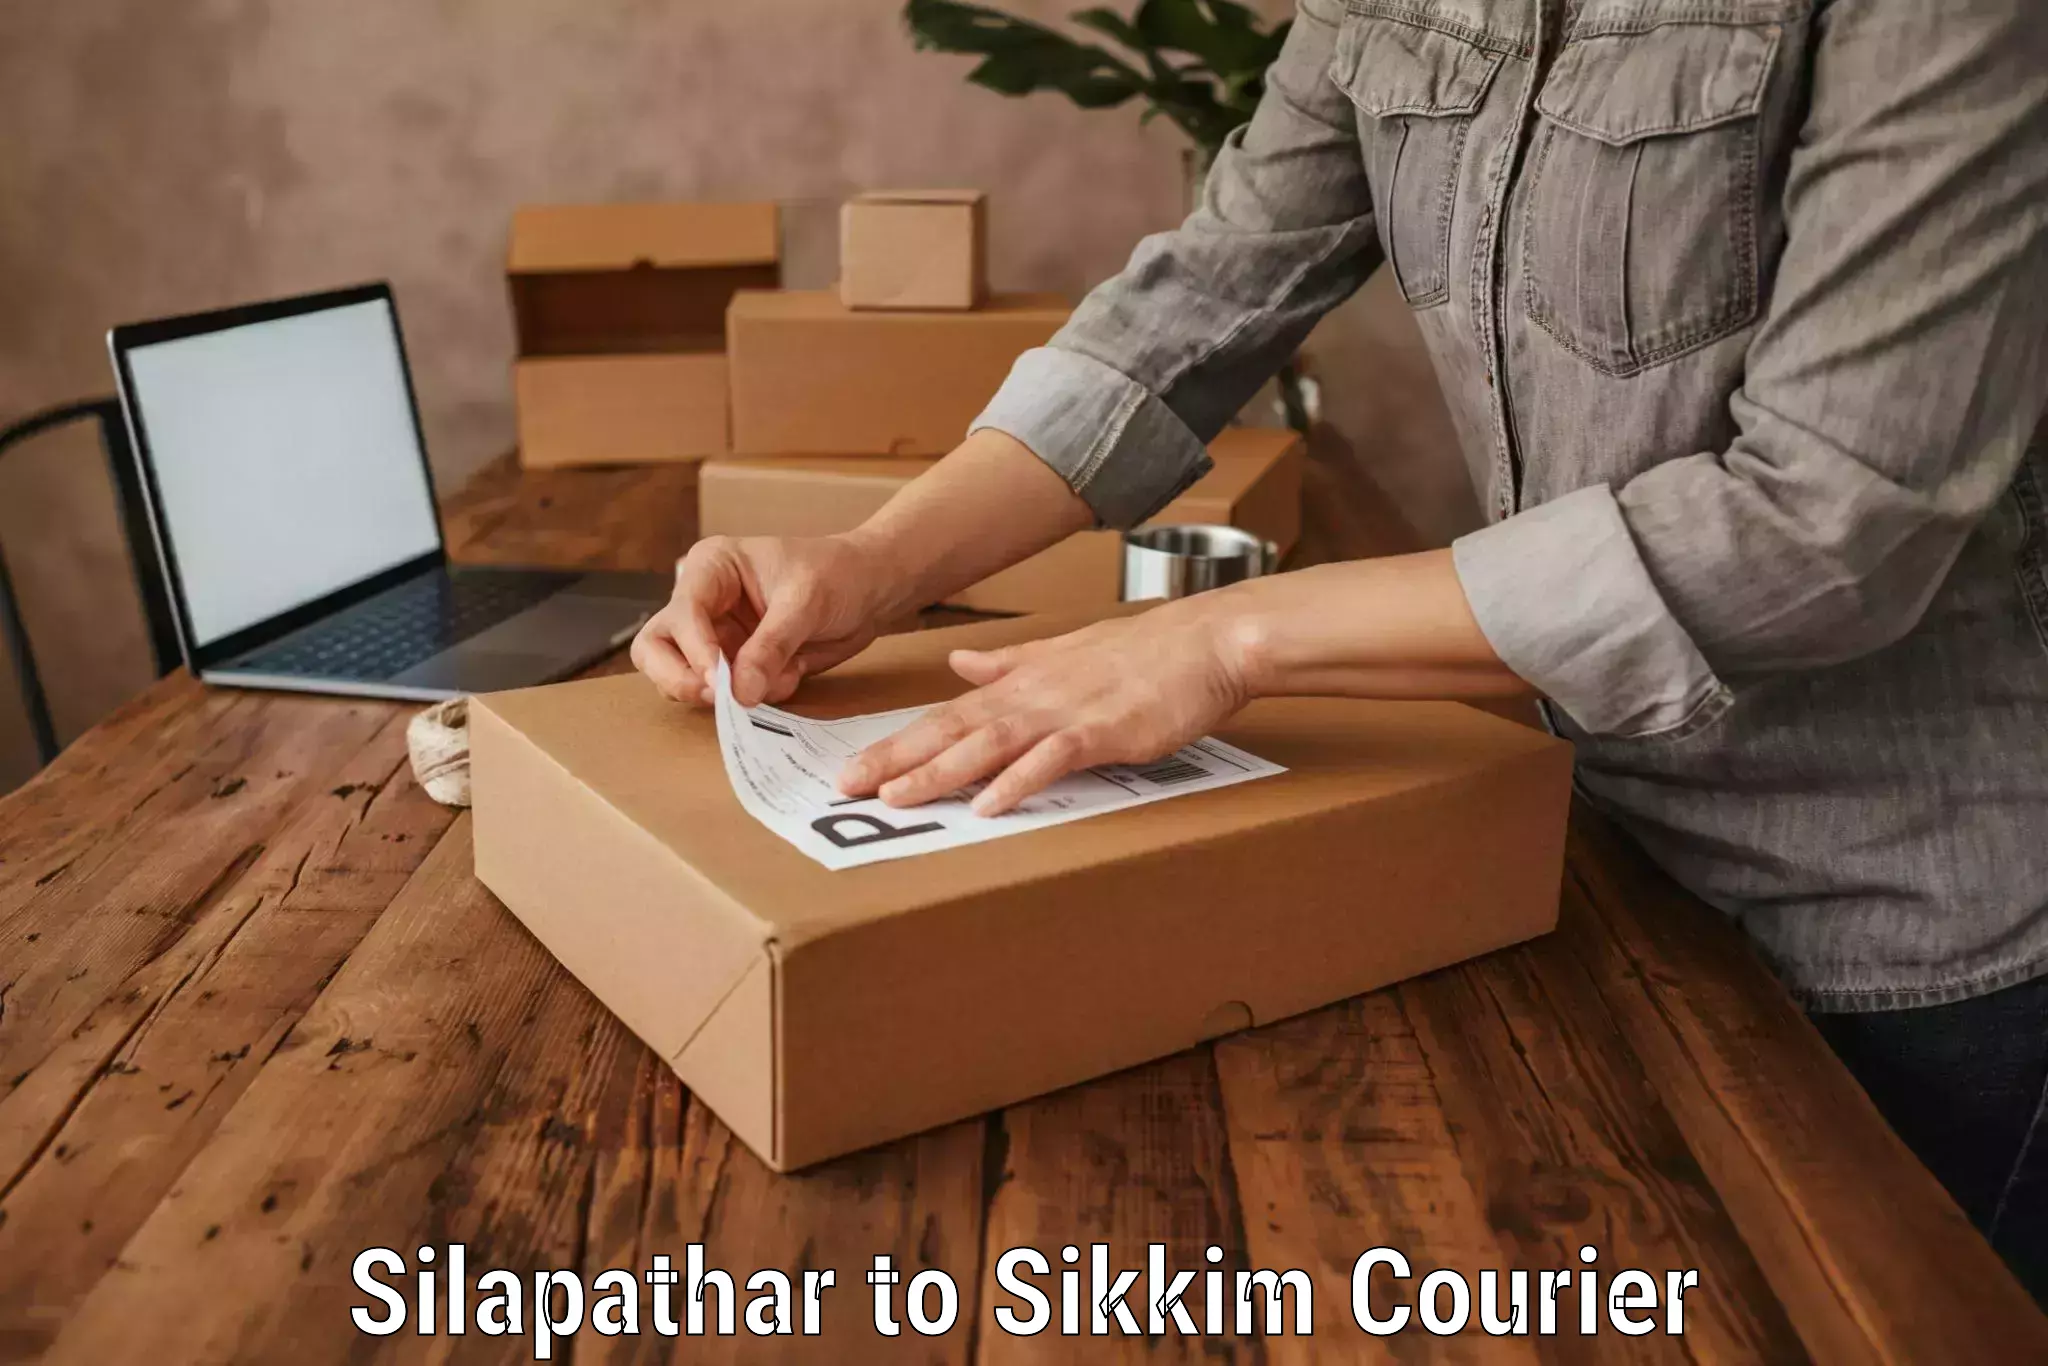 Luggage transport consultancy Silapathar to Mangan